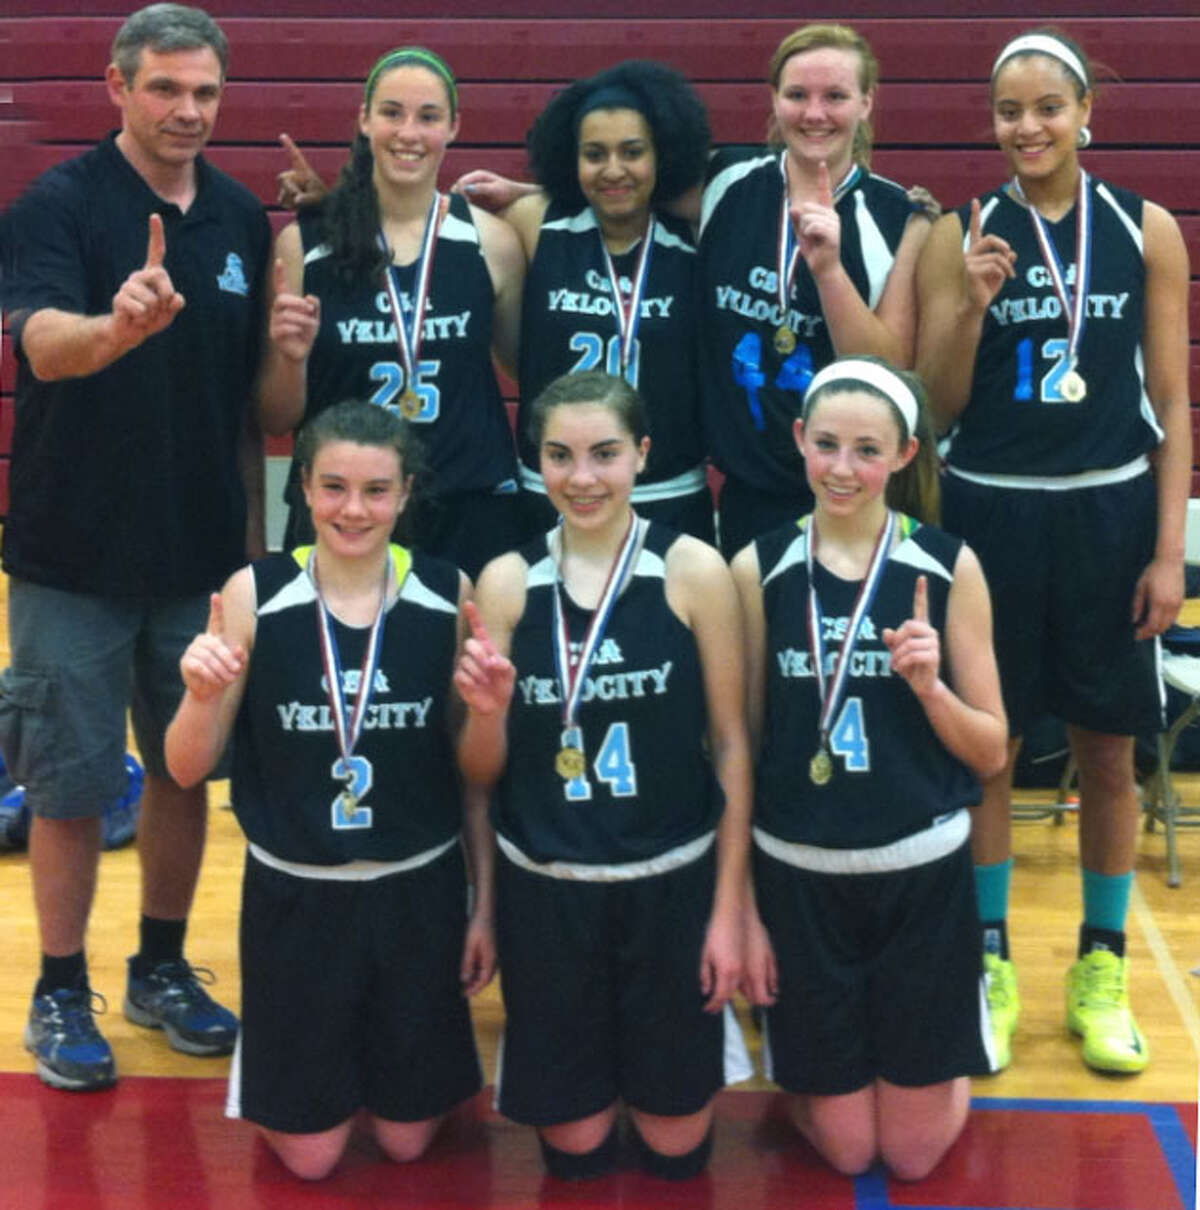 Coach Tom LaPorte and members of the Connecticut Sports Arena's 10th grade Velocity girls' basketball team celebrate their victory in a recent AAU tournament. Courtesy of the Connecticut Sports Arena